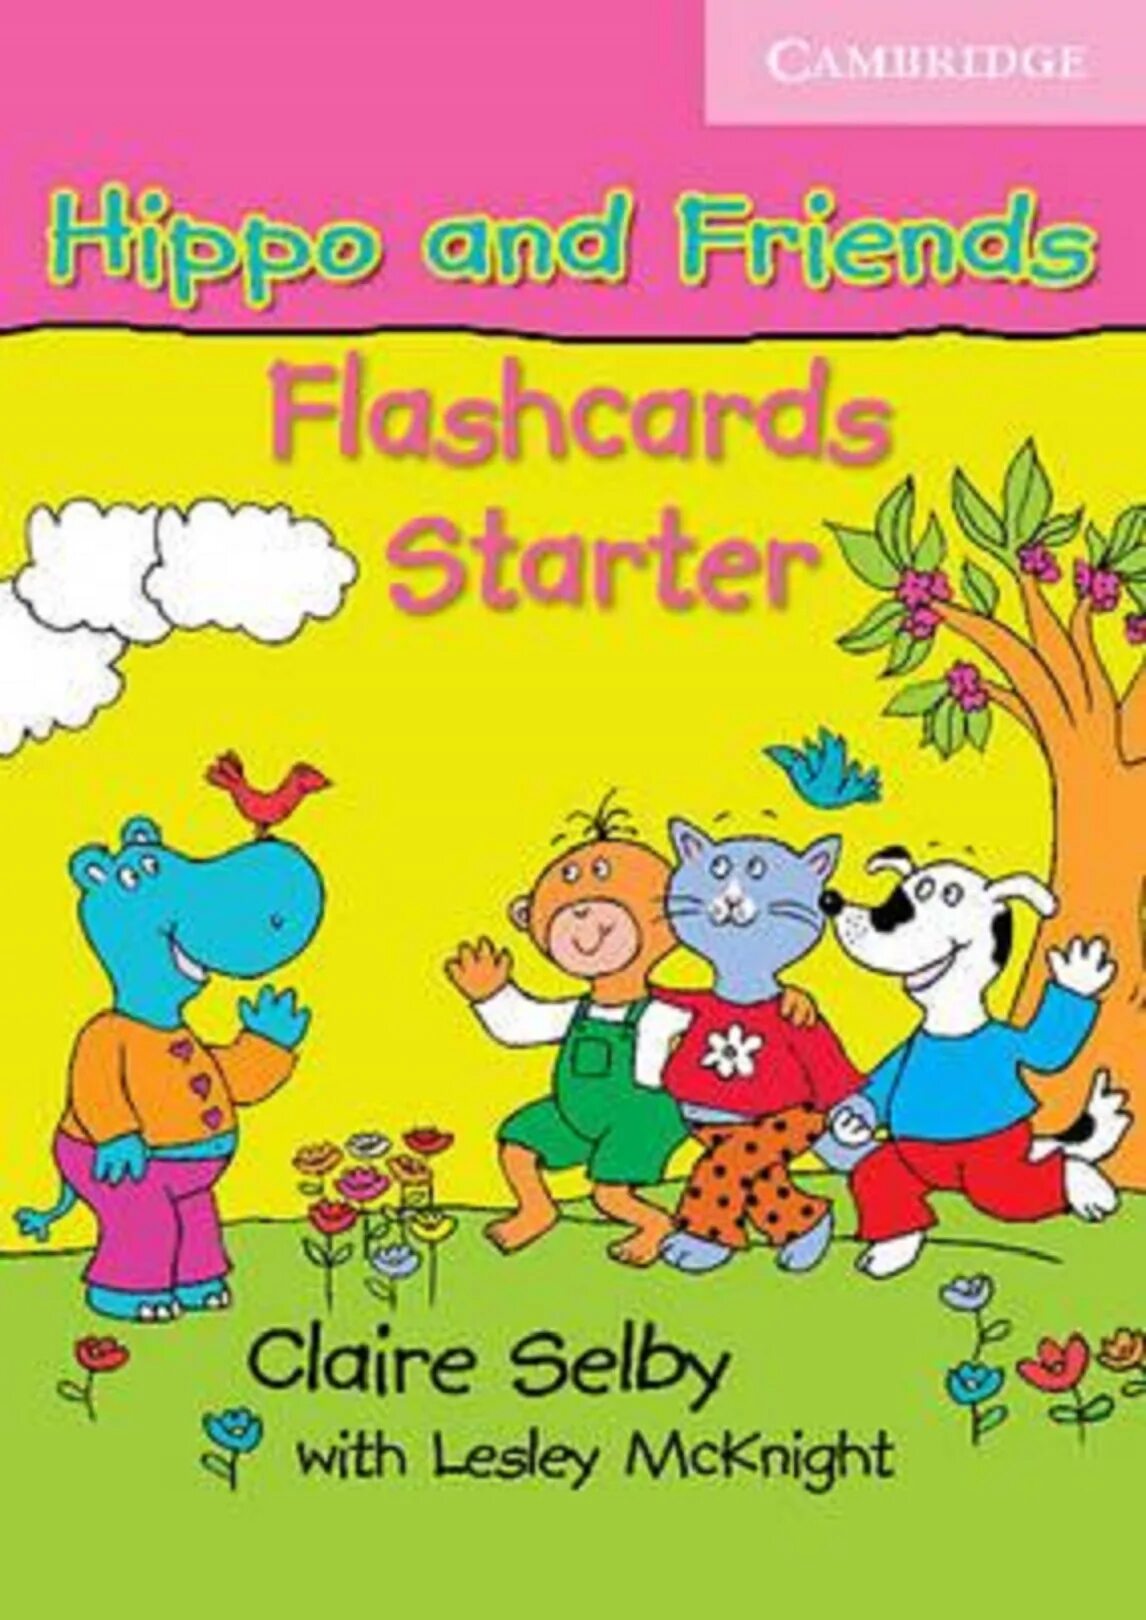 Starters flashcards. Hippo and friends. Hippo and friends 1. Hippo and friends 1 Flashcards. Hippo and friends Starter.